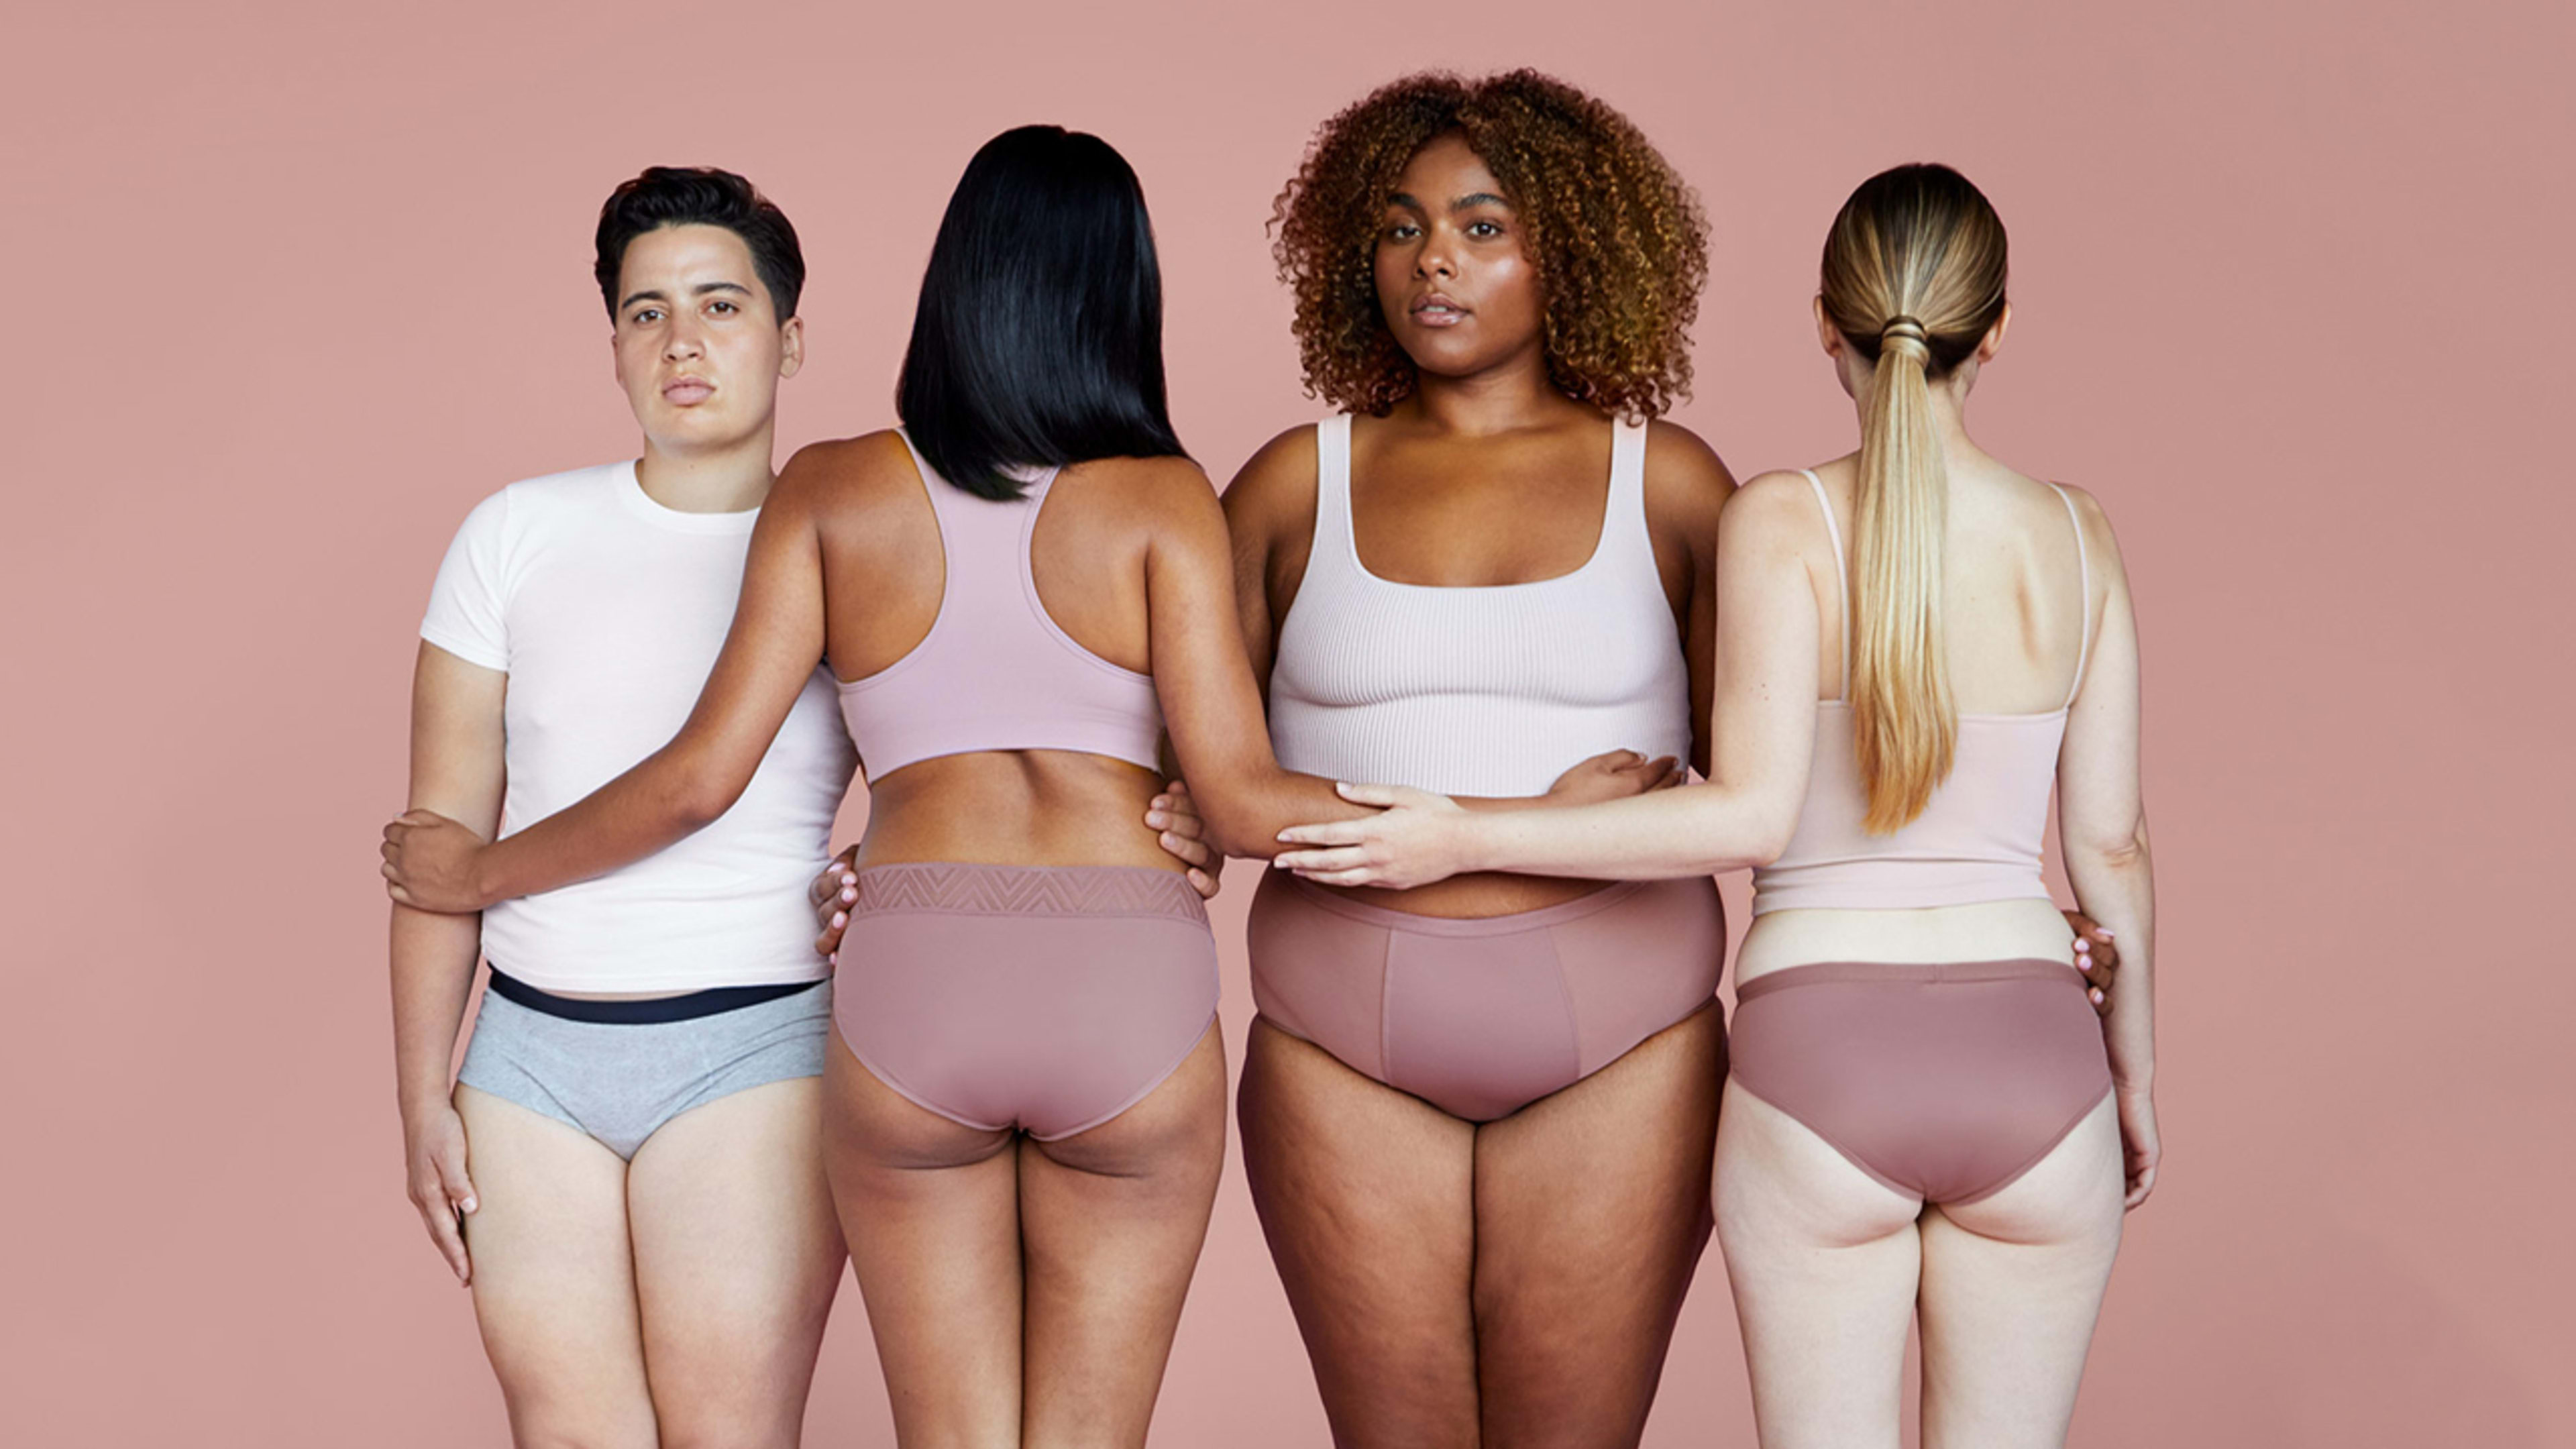 Thinx’s first national ad campaign imagines a world where men get periods, too